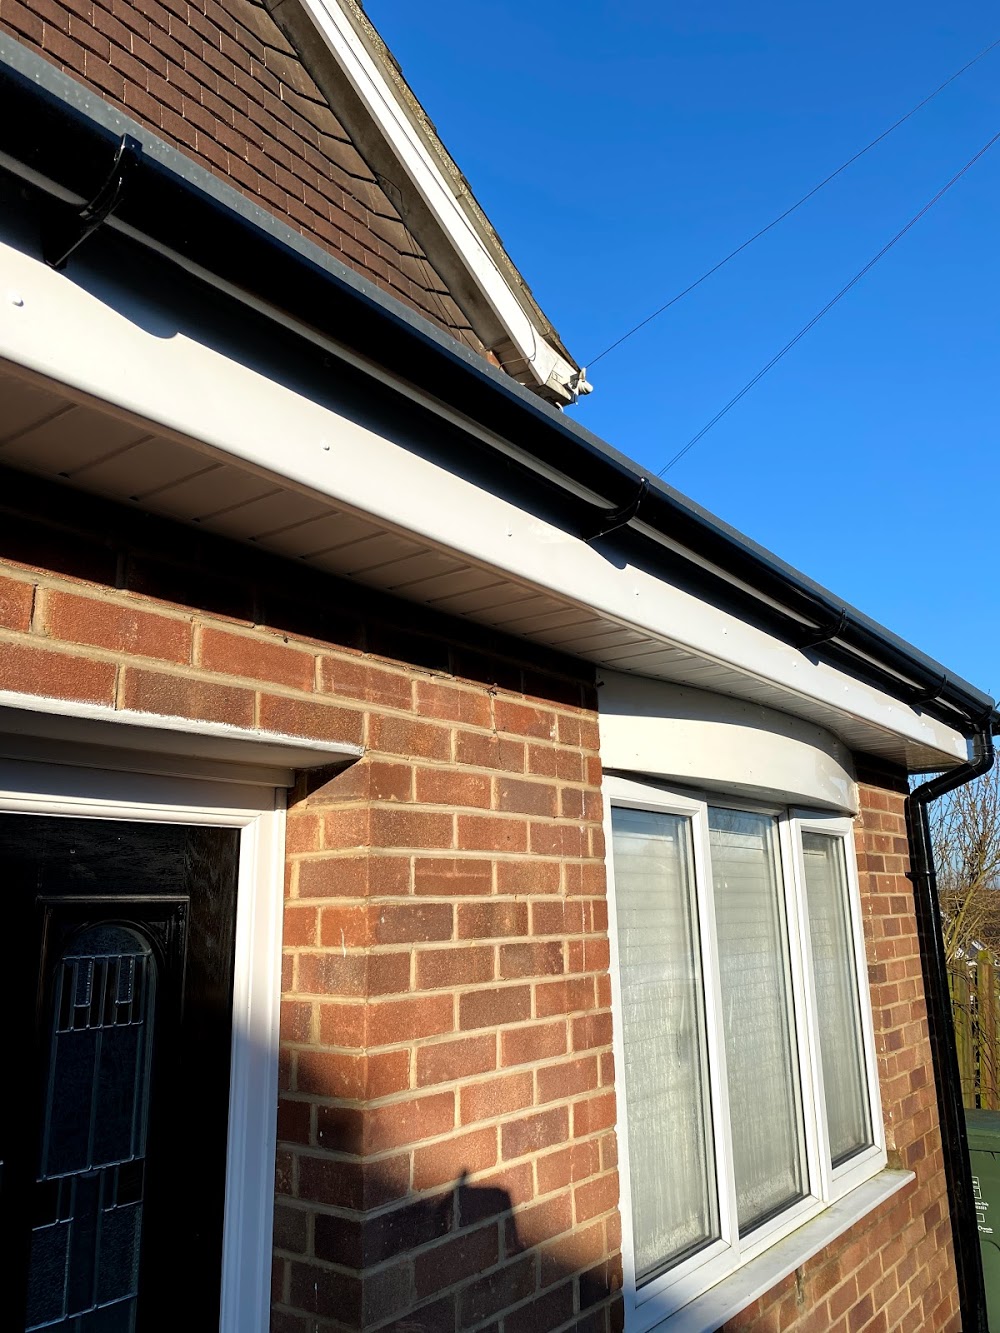 LSC Roofing Wickford- Roofer, Fascias, Flat roofs Wickford